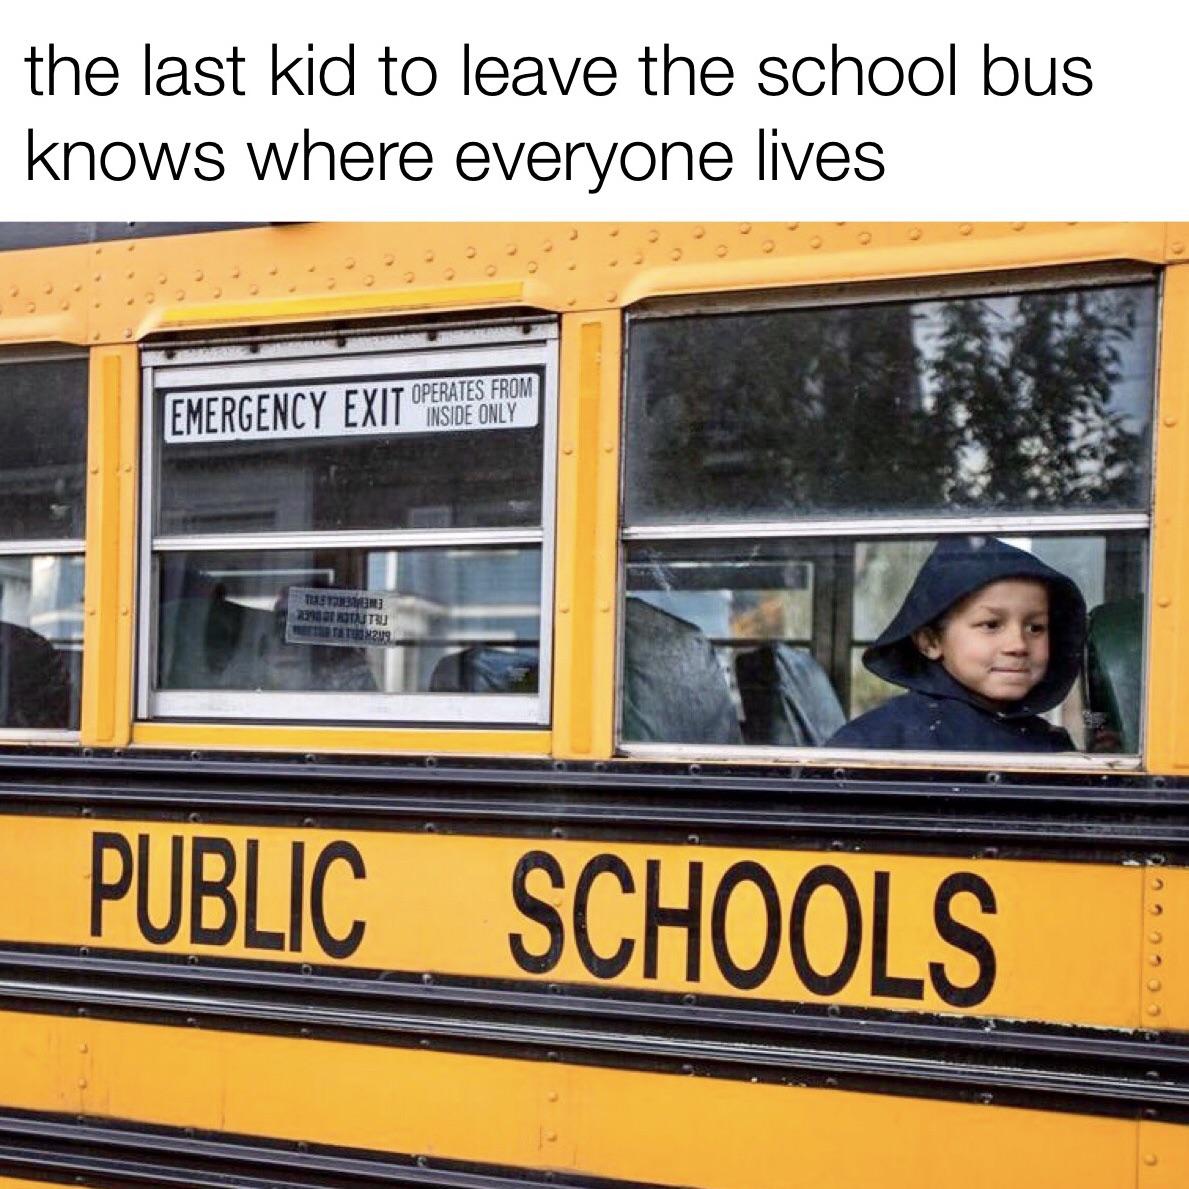 hilarious memes - school bus inside - the last kid to leave the school bus knows where everyone lives Emergency Exit Operates From Star 2 Bottru 249 Public Schools